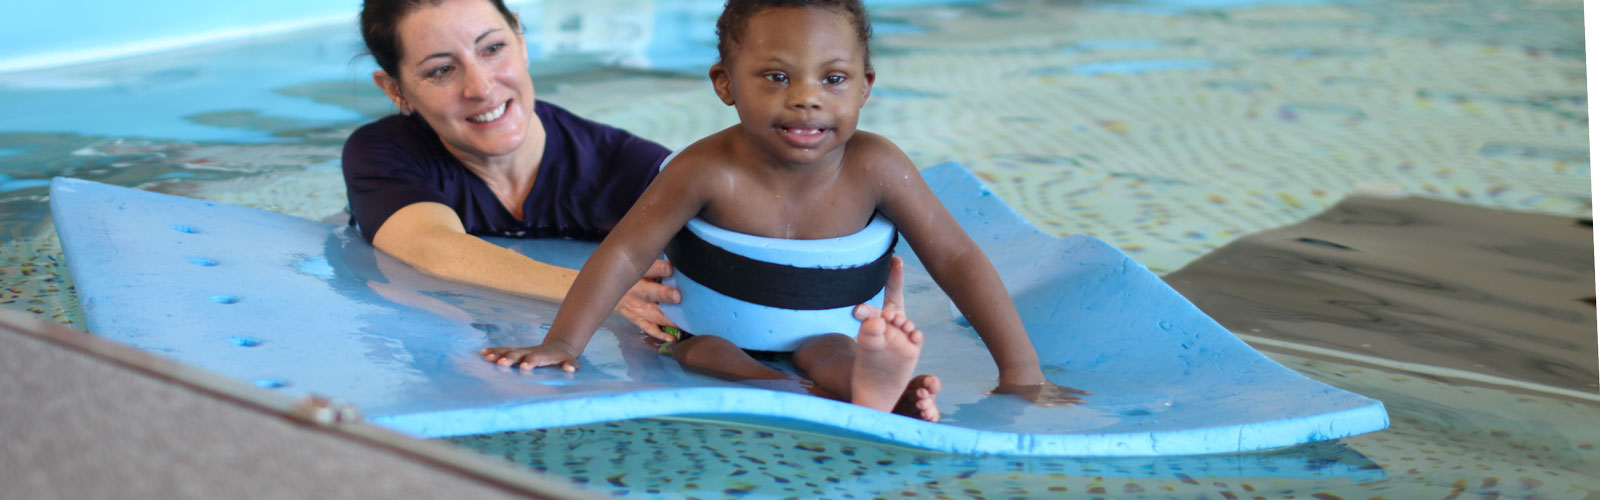 A female therapist holds a young boy around the waist as he sits on a raft during an aquatic therapy session.